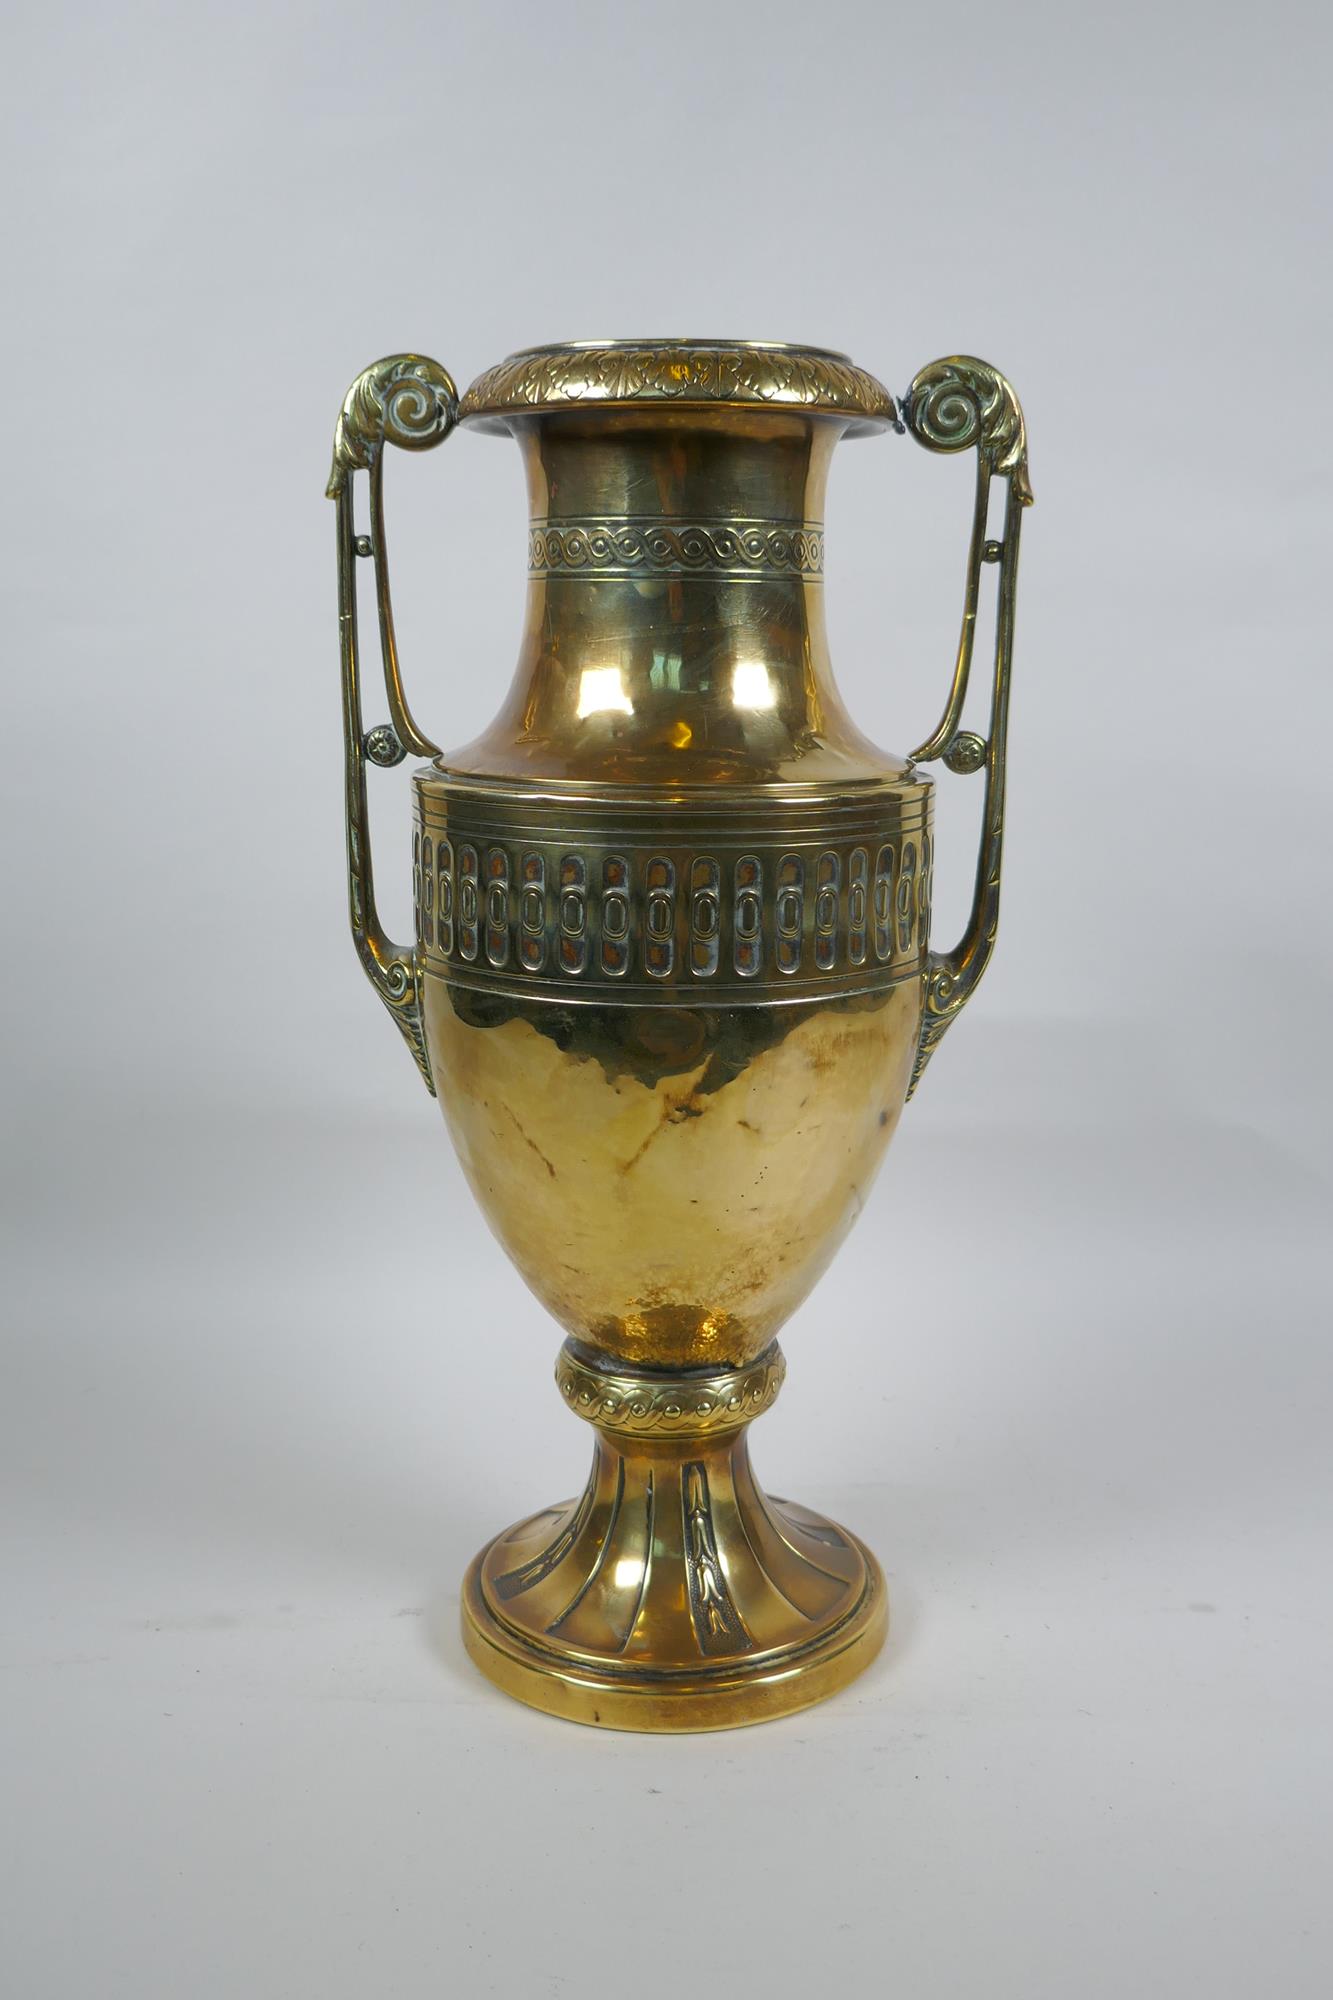 A late C19th/early C20th German brass two handled Grecian style urn by Carl Deffner of Esslingen, - Image 3 of 6